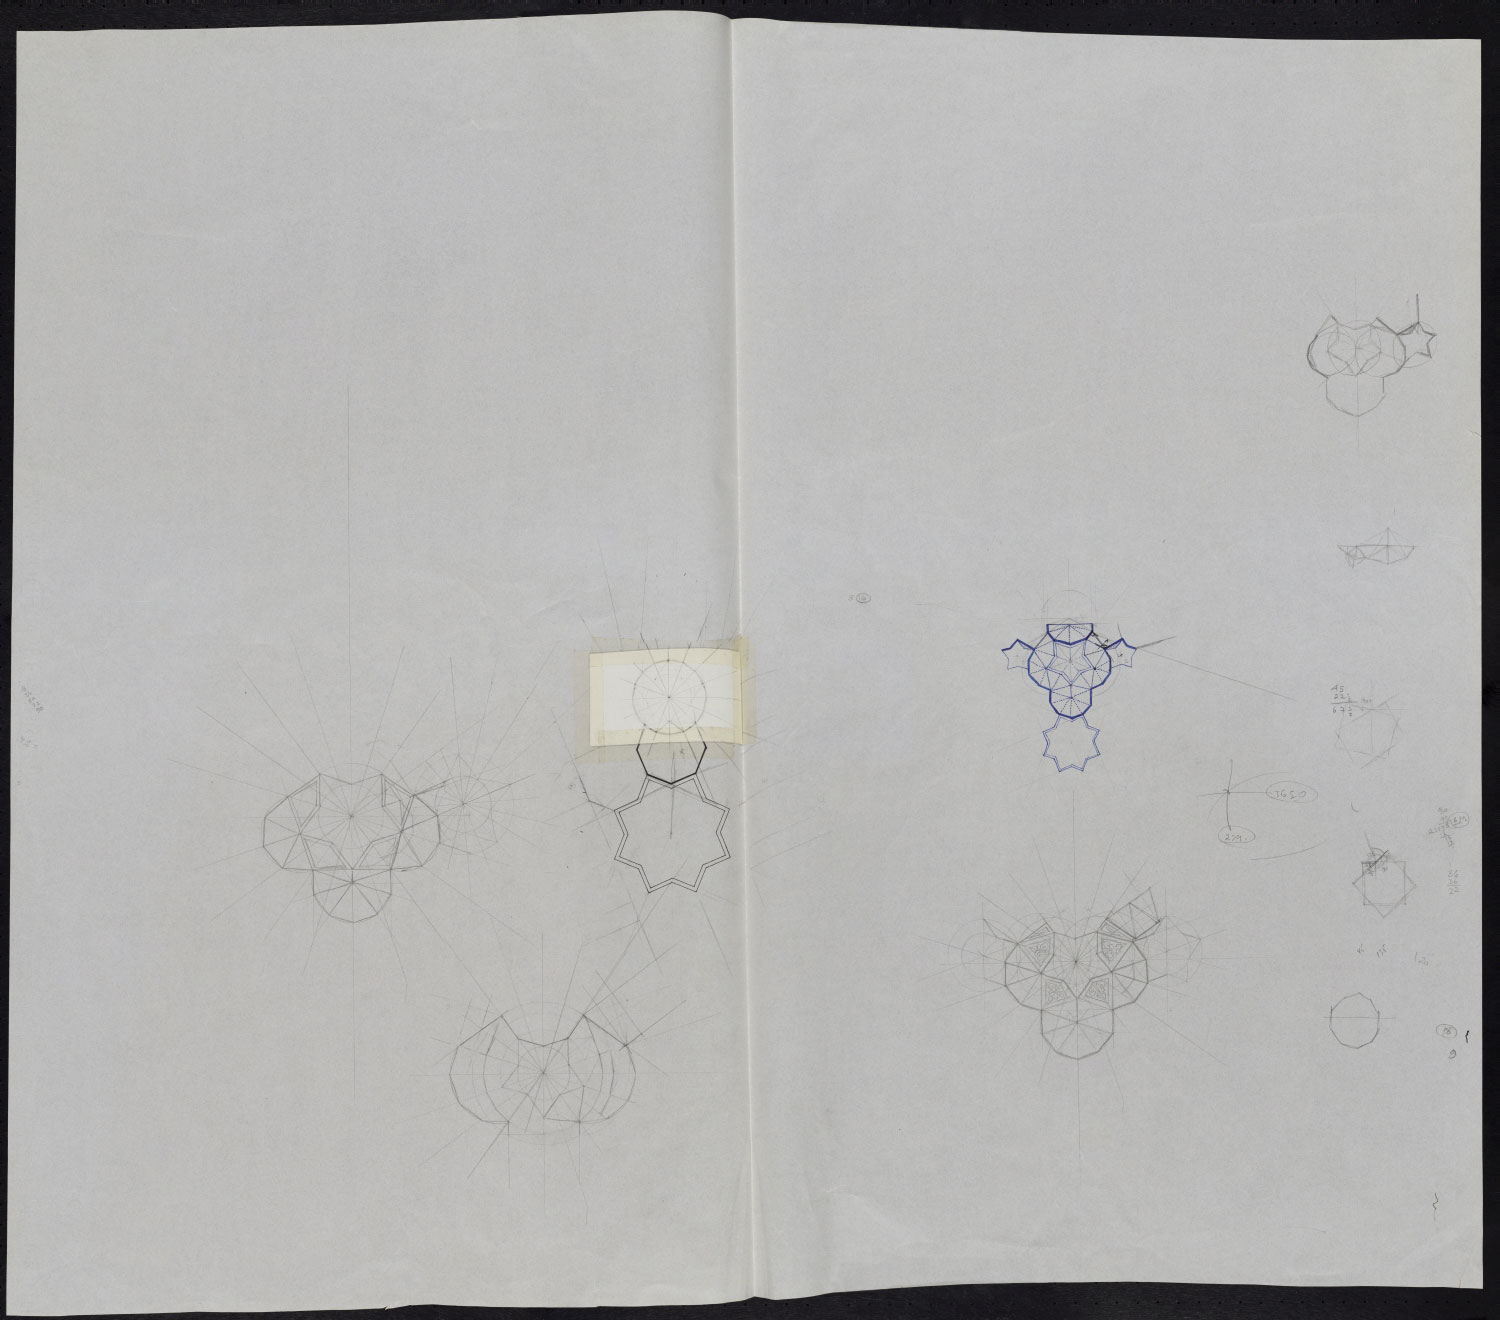 Studies of muqarnas ornament from various unidentified sites.